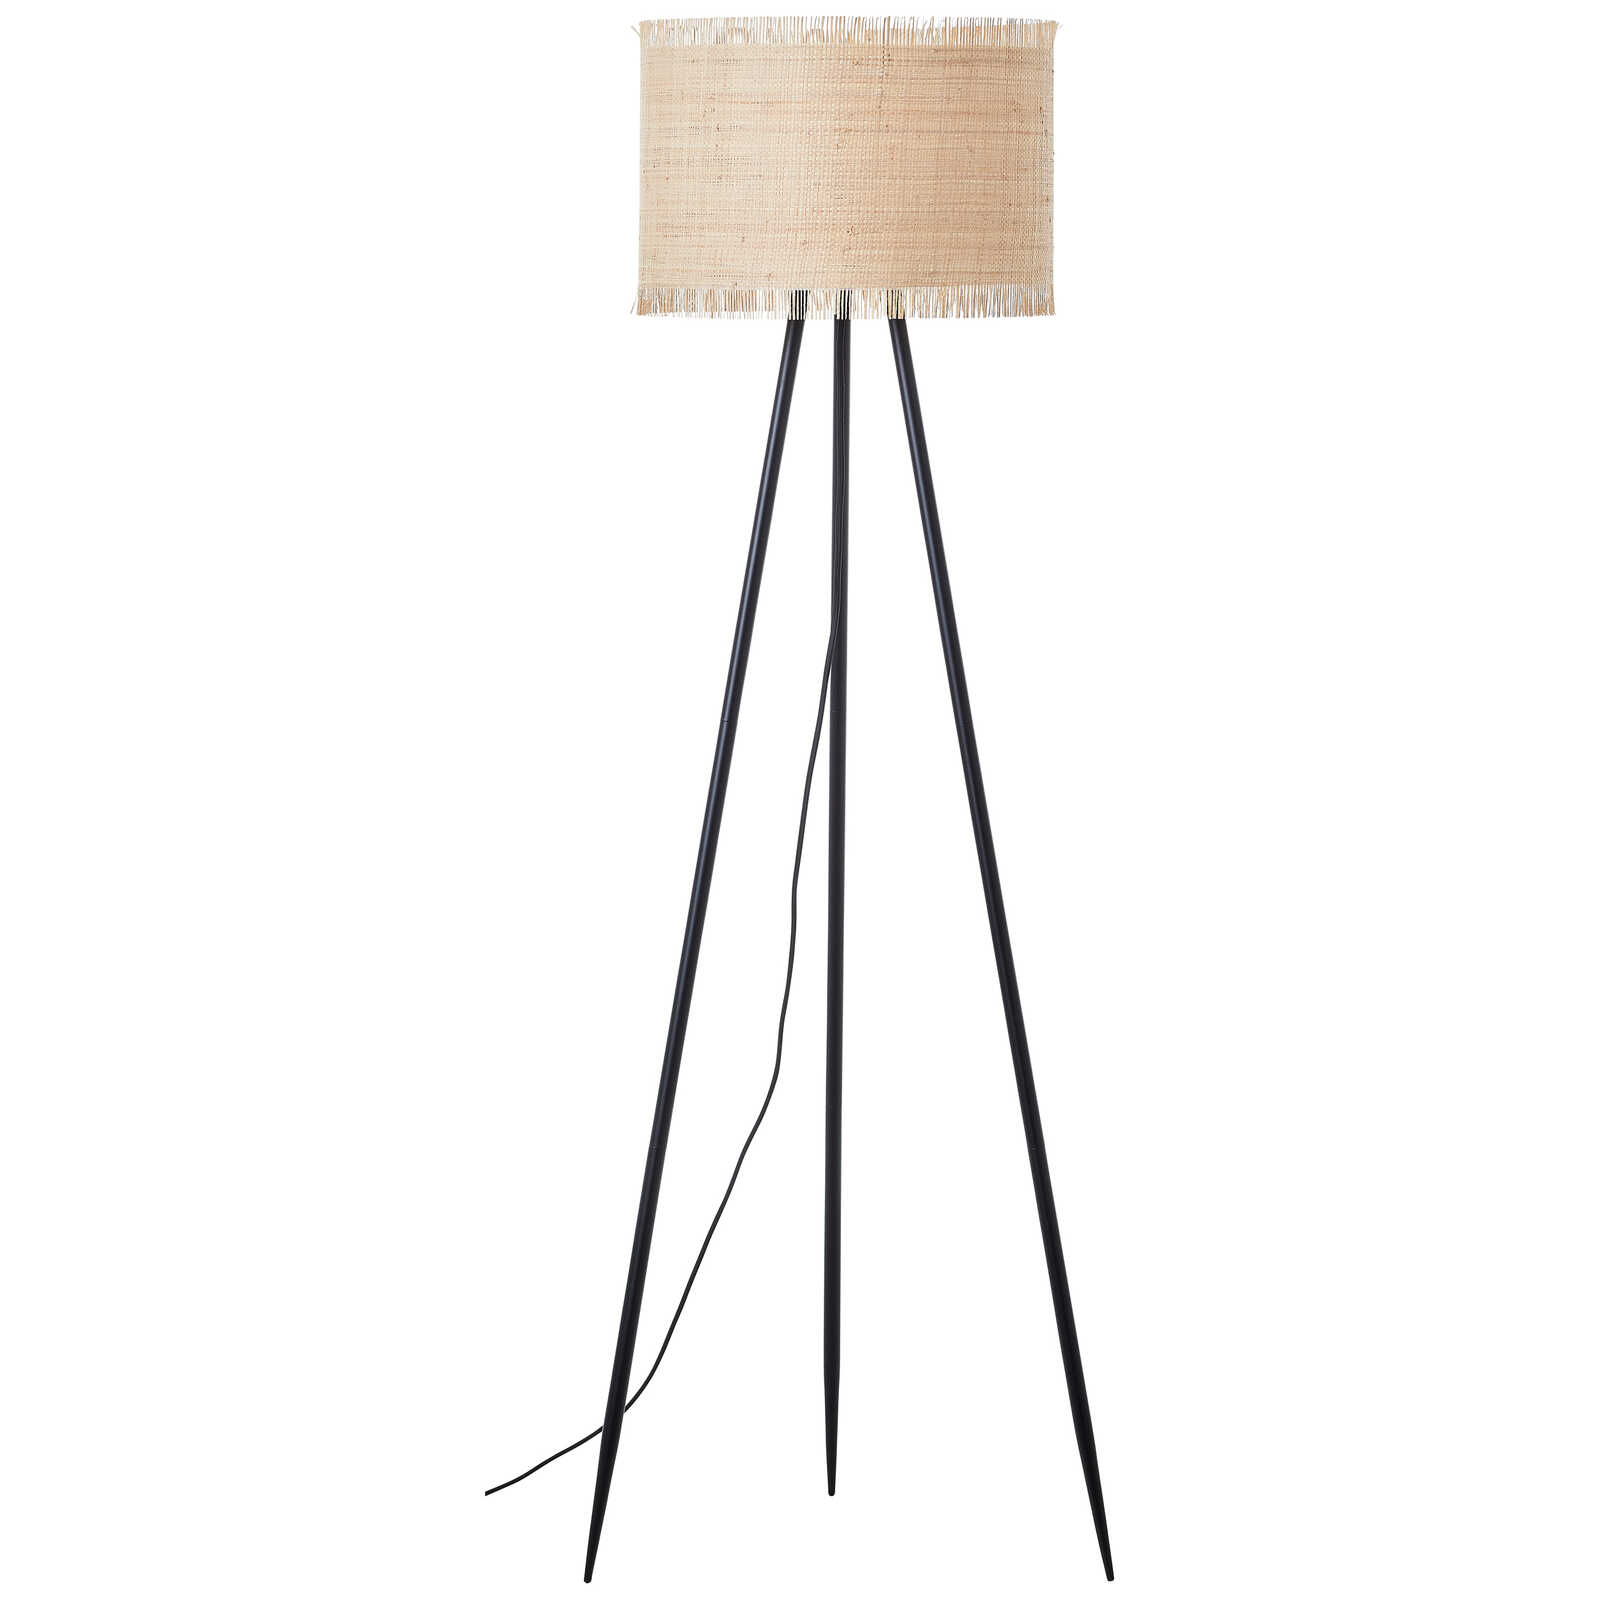             Floor lamp made of seagrass - Mateo 6 - Brown
        